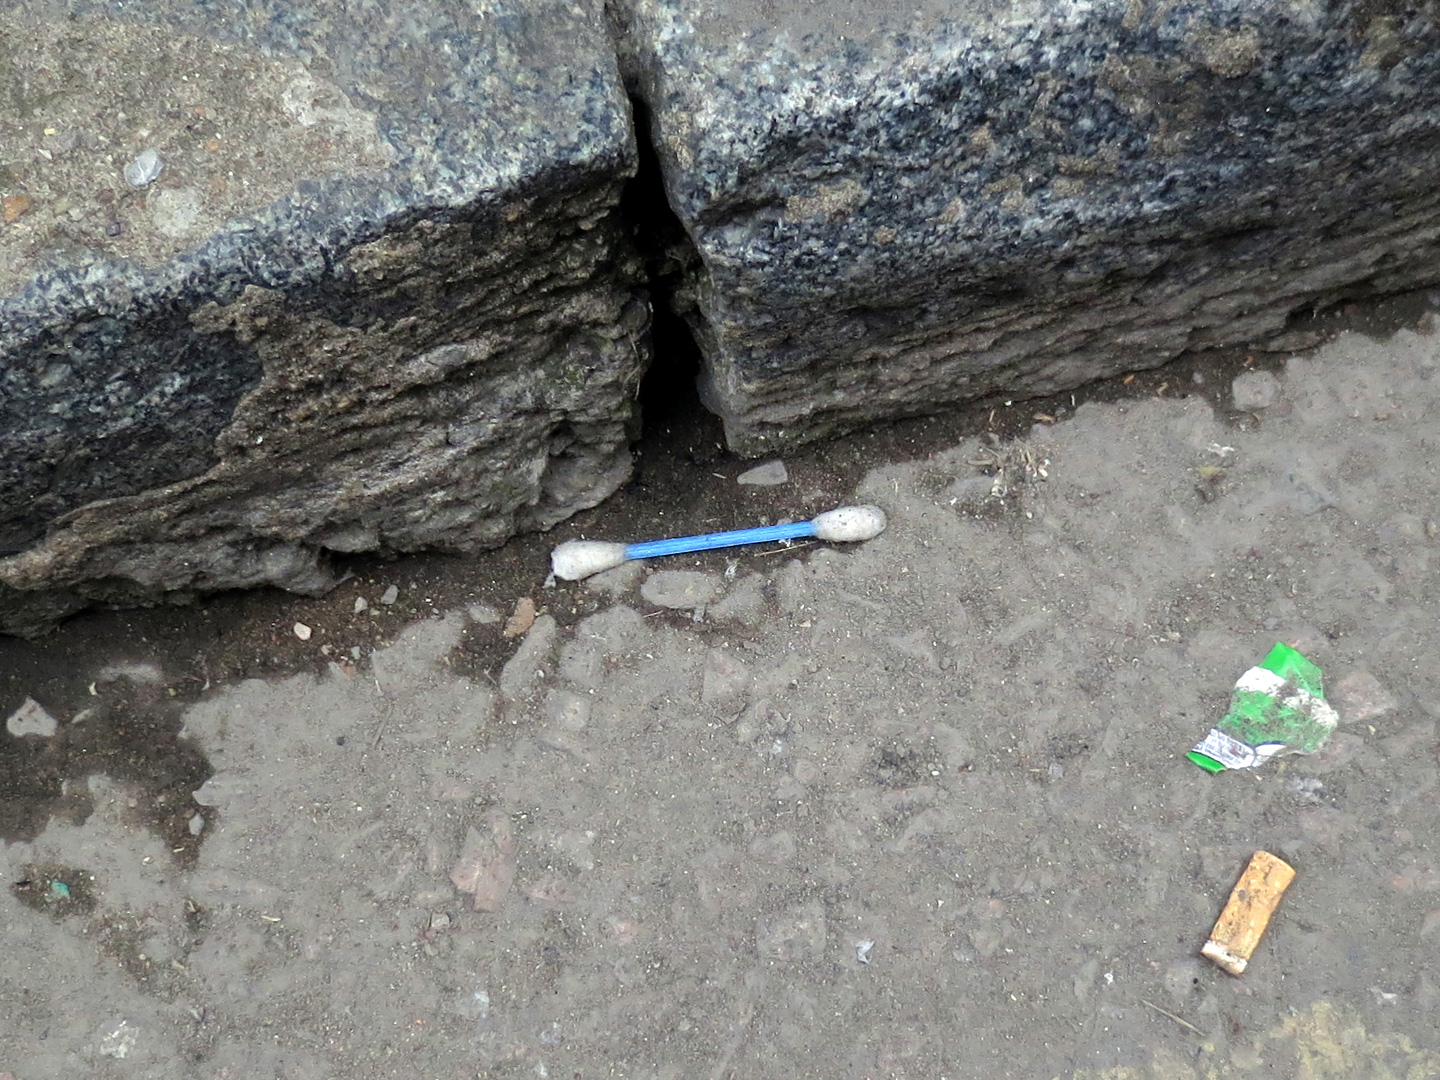 A photograph of a q-tip in on the side of the road, near the sidewalk curb.